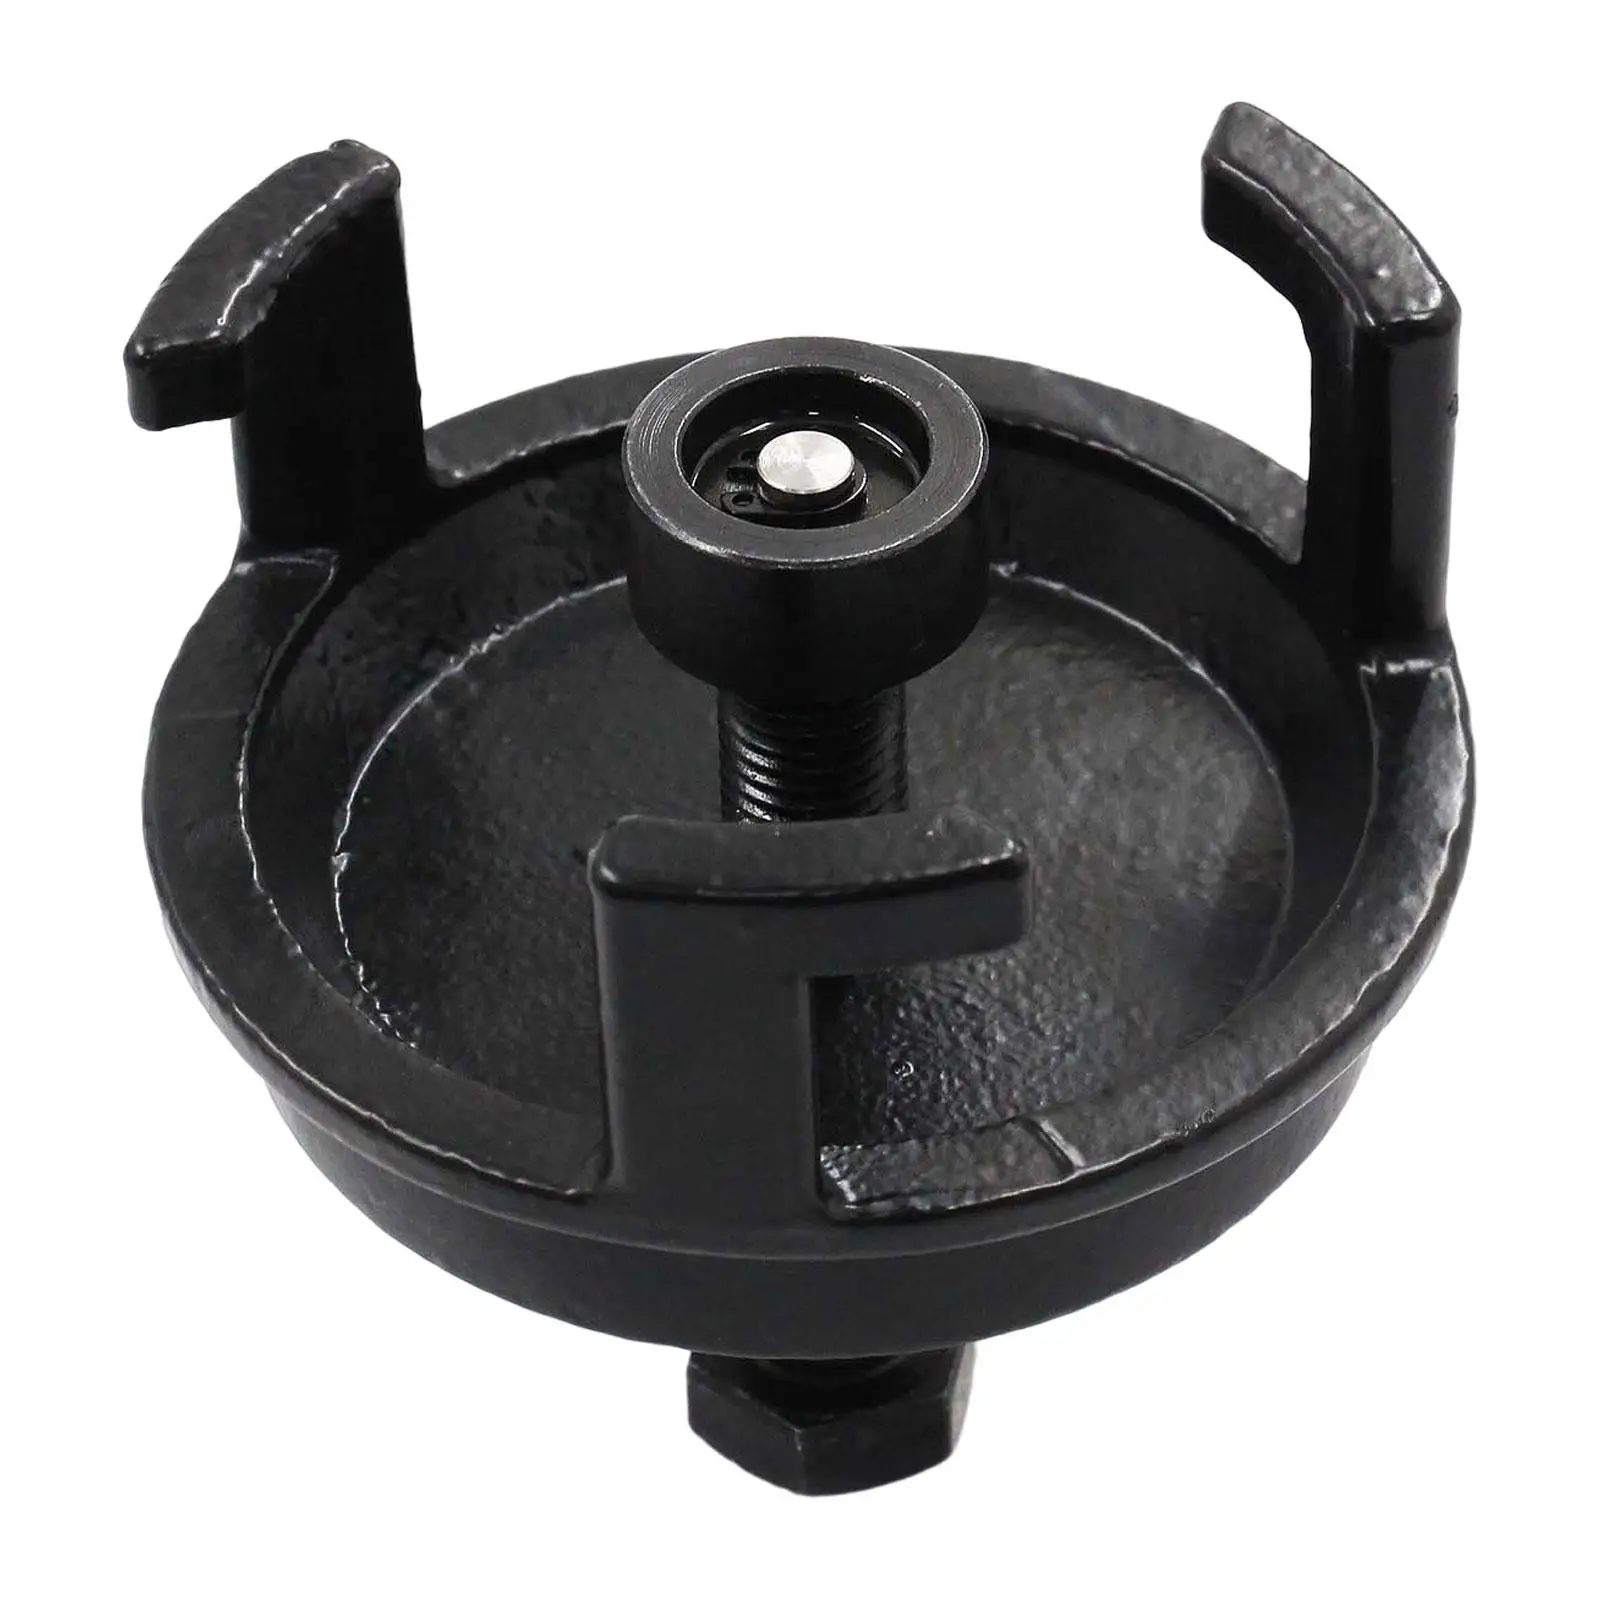 Harmonic Balancer Puller Devices Easy Using Components Replaces Durable for Auto Removal Tool Professional Crank Pulley